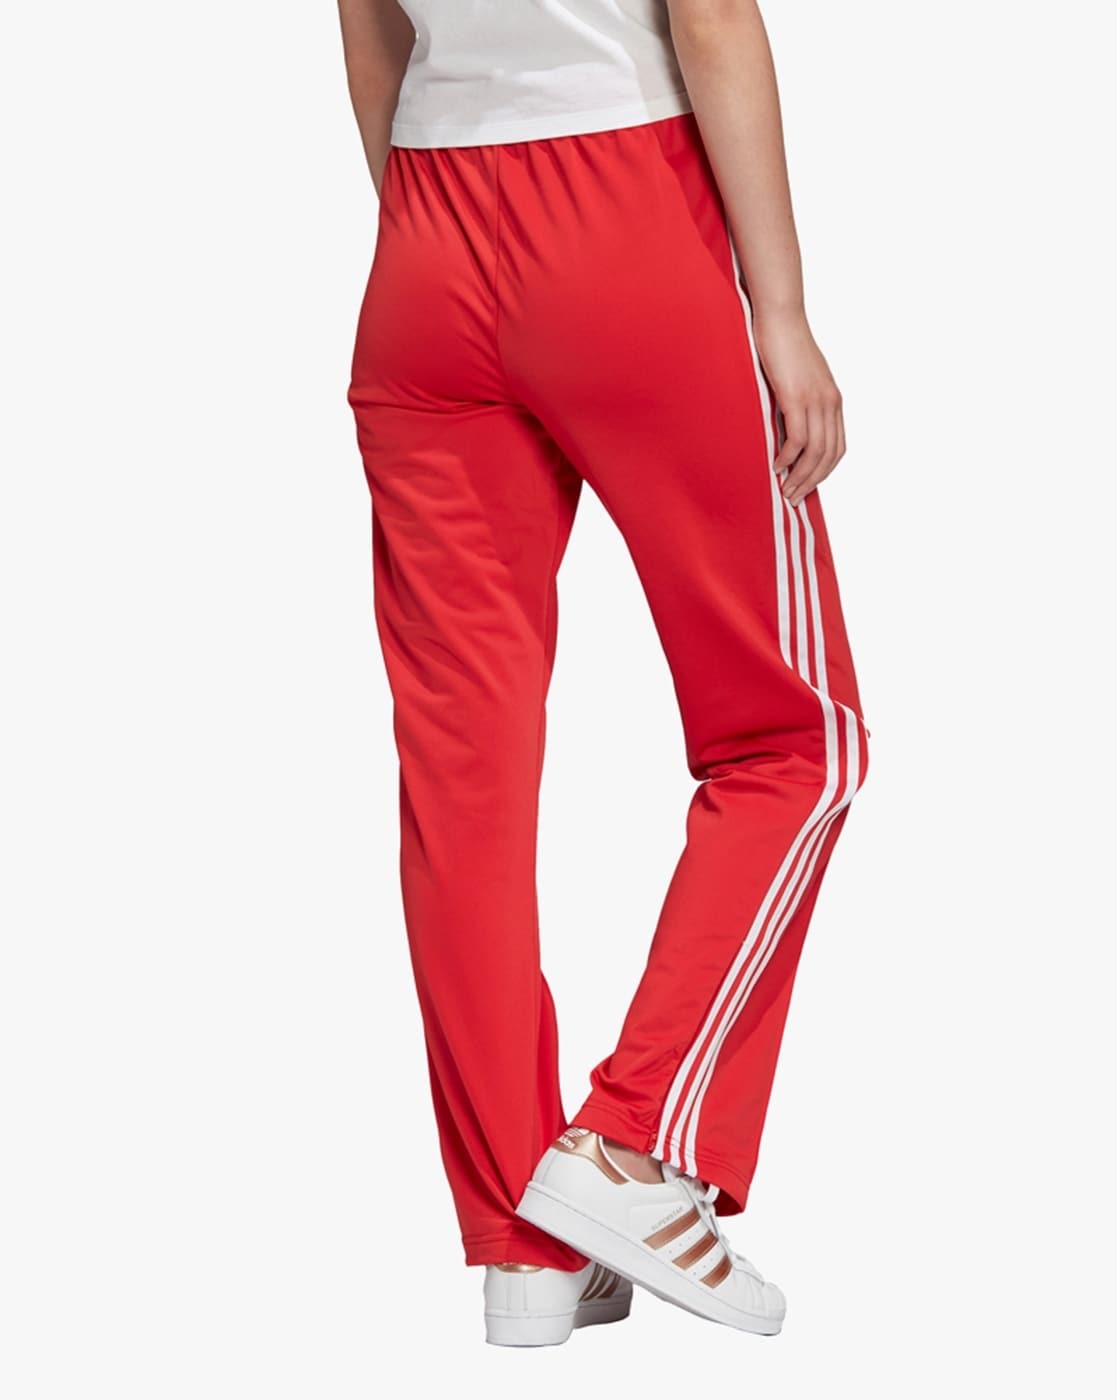 CUTOMISED Mens Apparels Adidas Track Pants, For Casual, Size: S-xxxl